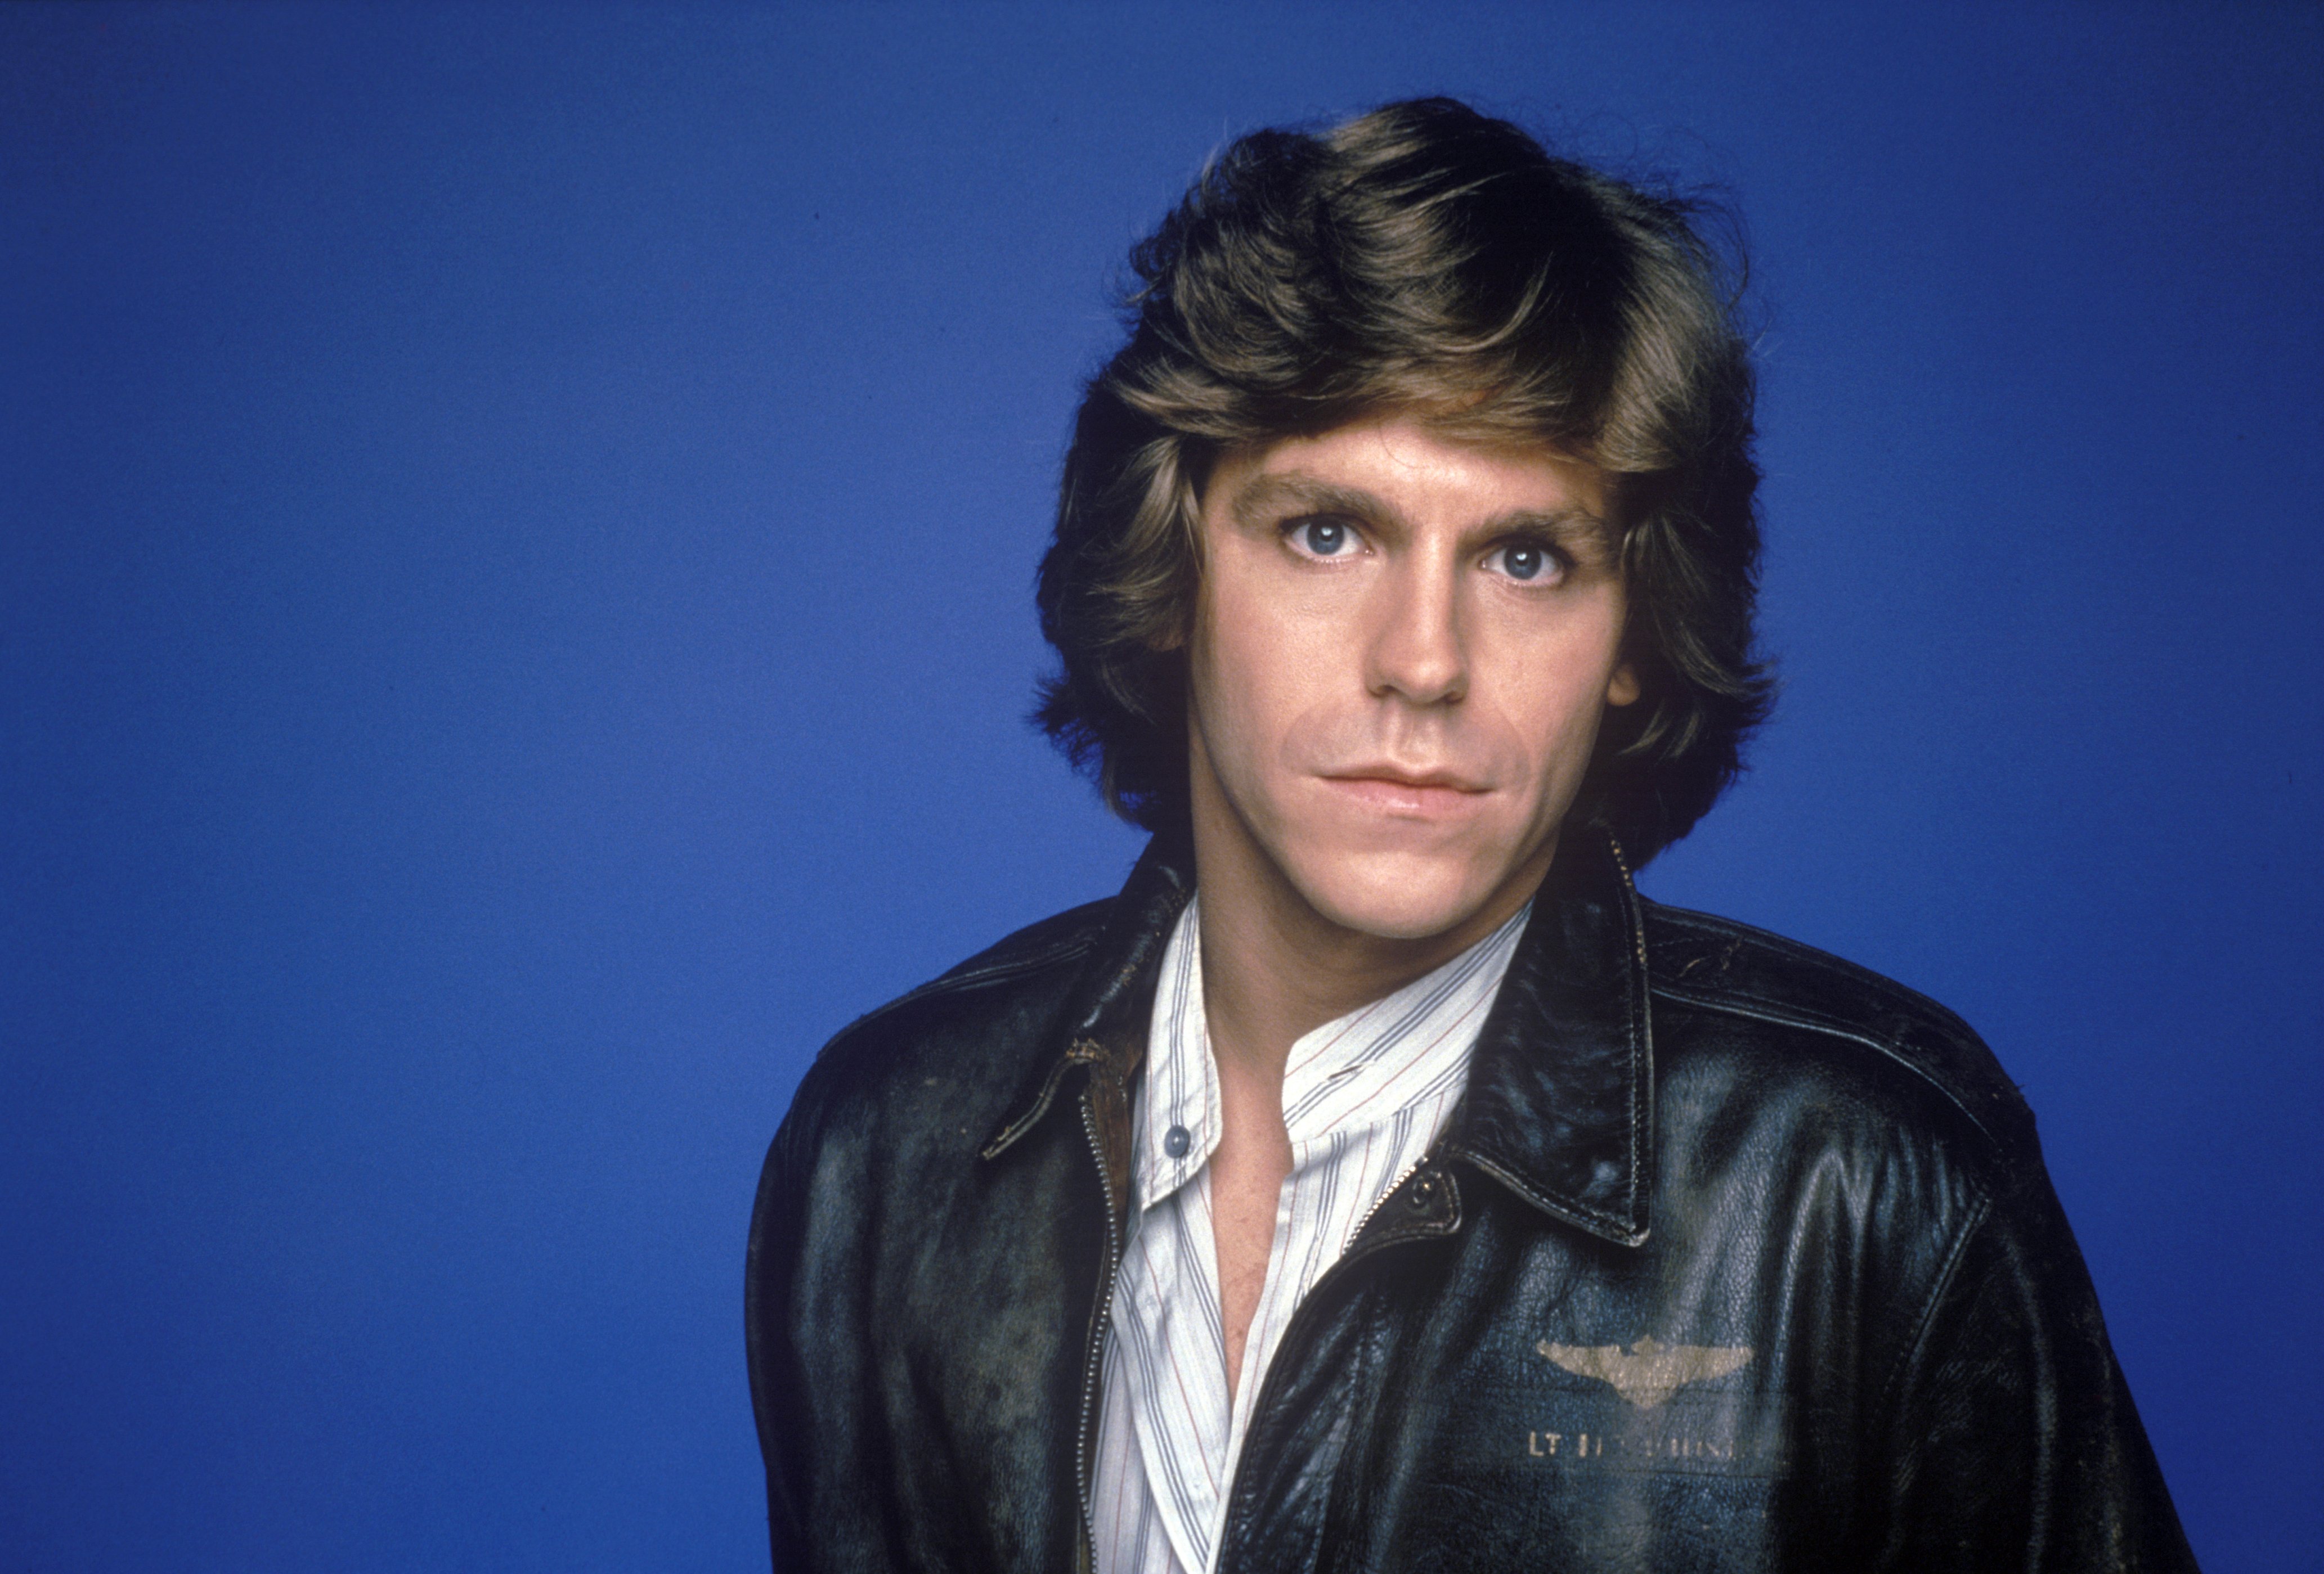 Jeff Conaway (as Bobby) on the Disney General Entertainment attends a photocall during Season 1 of "Taxi" on September 12, 1978 | Photo: Getty Images